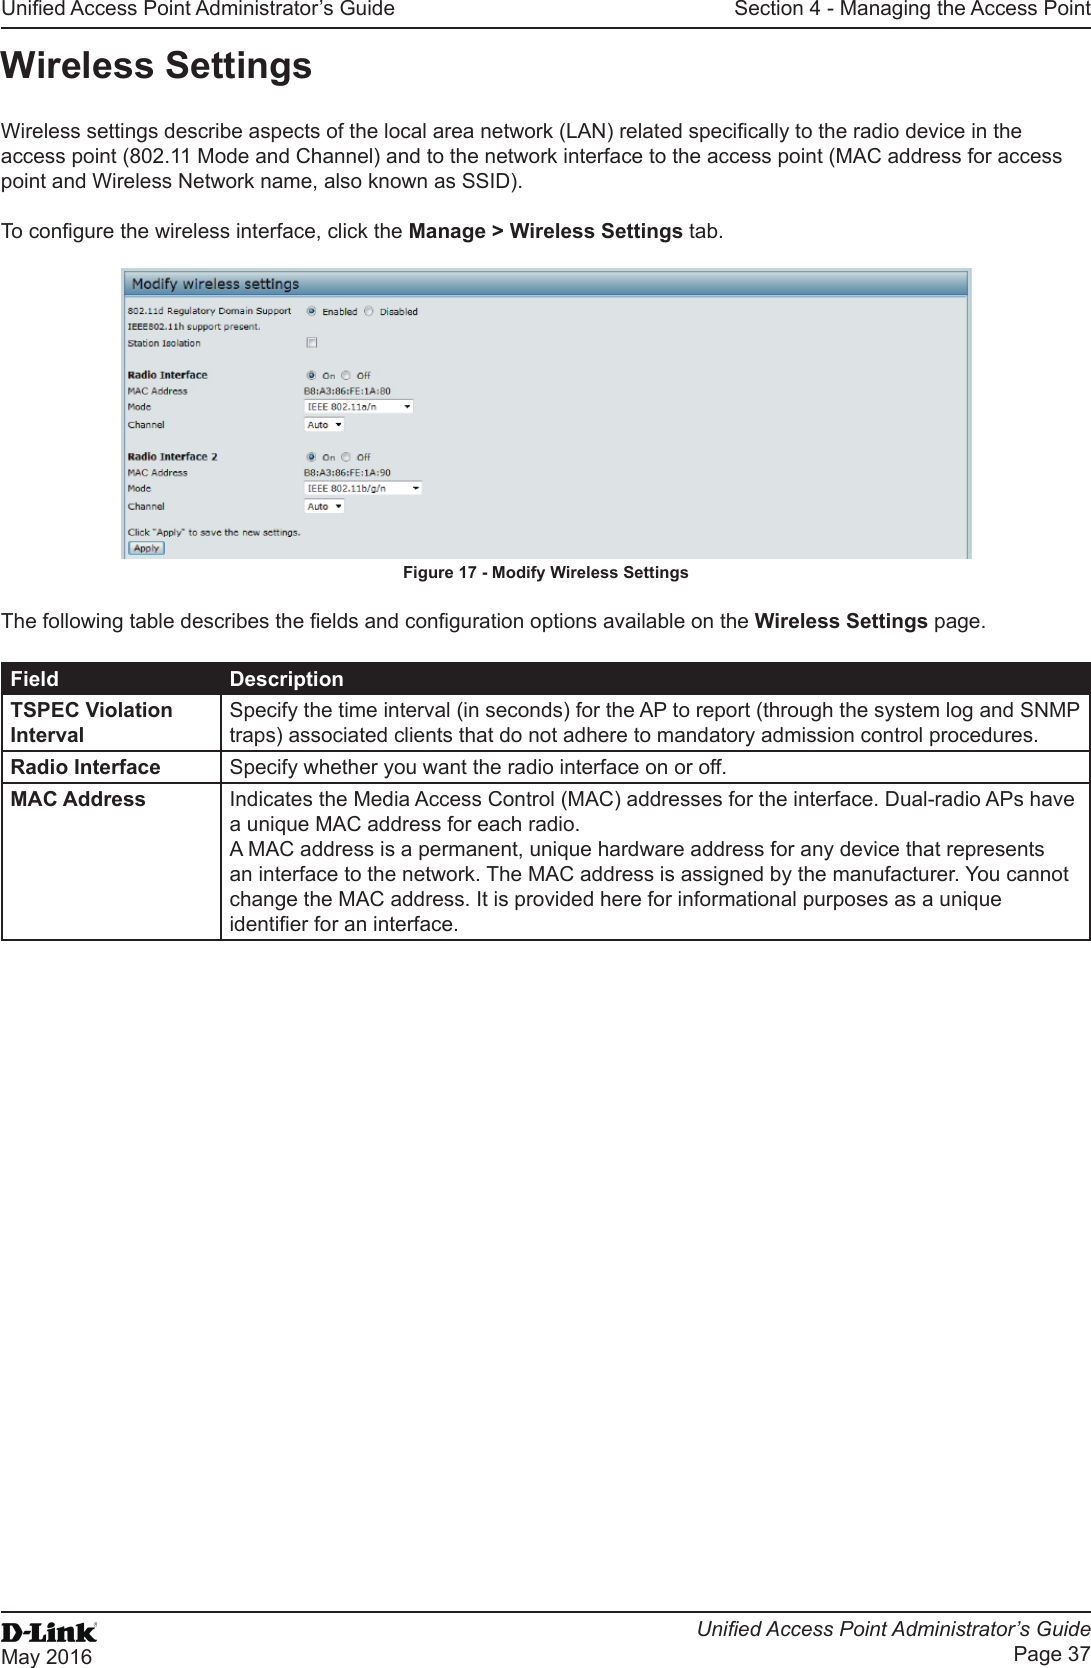 Unied Access Point Administrator’s GuideUnied Access Point Administrator’s GuidePage 37May 2016Section 4 - Managing the Access PointWireless SettingsWireless settings describe aspects of the local area network (LAN) related specically to the radio device in the access point (802.11 Mode and Channel) and to the network interface to the access point (MAC address for access point and Wireless Network name, also known as SSID). To congure the wireless interface, click the Manage &gt; Wireless Settings tab.Figure 17 - Modify Wireless SettingsThe following table describes the elds and conguration options available on the Wireless Settings page.Field DescriptionTSPEC Violation IntervalSpecify the time interval (in seconds) for the AP to report (through the system log and SNMP traps) associated clients that do not adhere to mandatory admission control procedures.Radio Interface Specify whether you want the radio interface on or off.MAC Address Indicates the Media Access Control (MAC) addresses for the interface. Dual-radio APs have a unique MAC address for each radio.A MAC address is a permanent, unique hardware address for any device that represents an interface to the network. The MAC address is assigned by the manufacturer. You cannot change the MAC address. It is provided here for informational purposes as a unique identier for an interface.